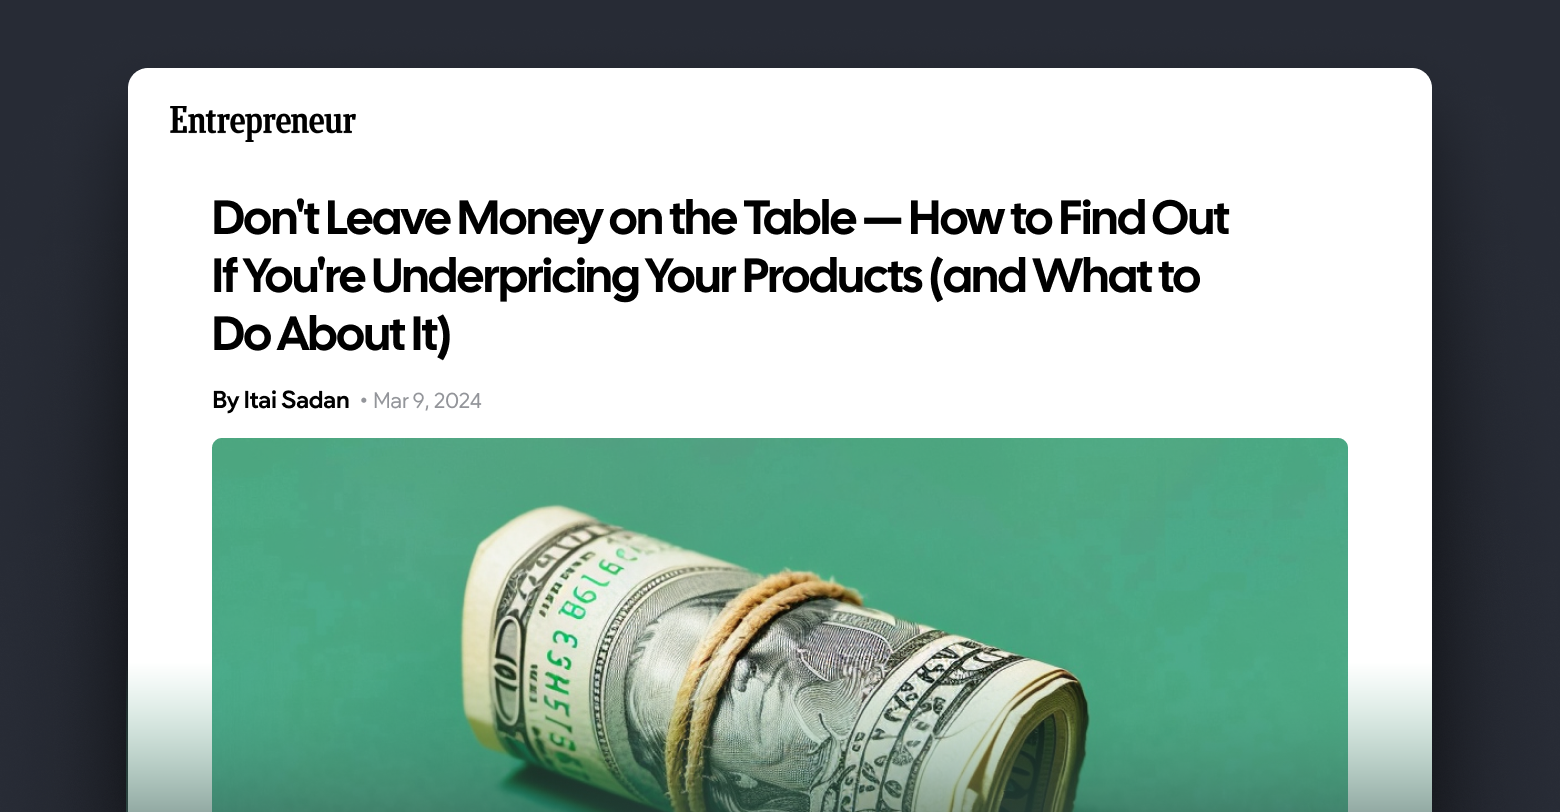 A byline article by Itai Sadan published by Entrepreneur showing a stack of money and a headline.